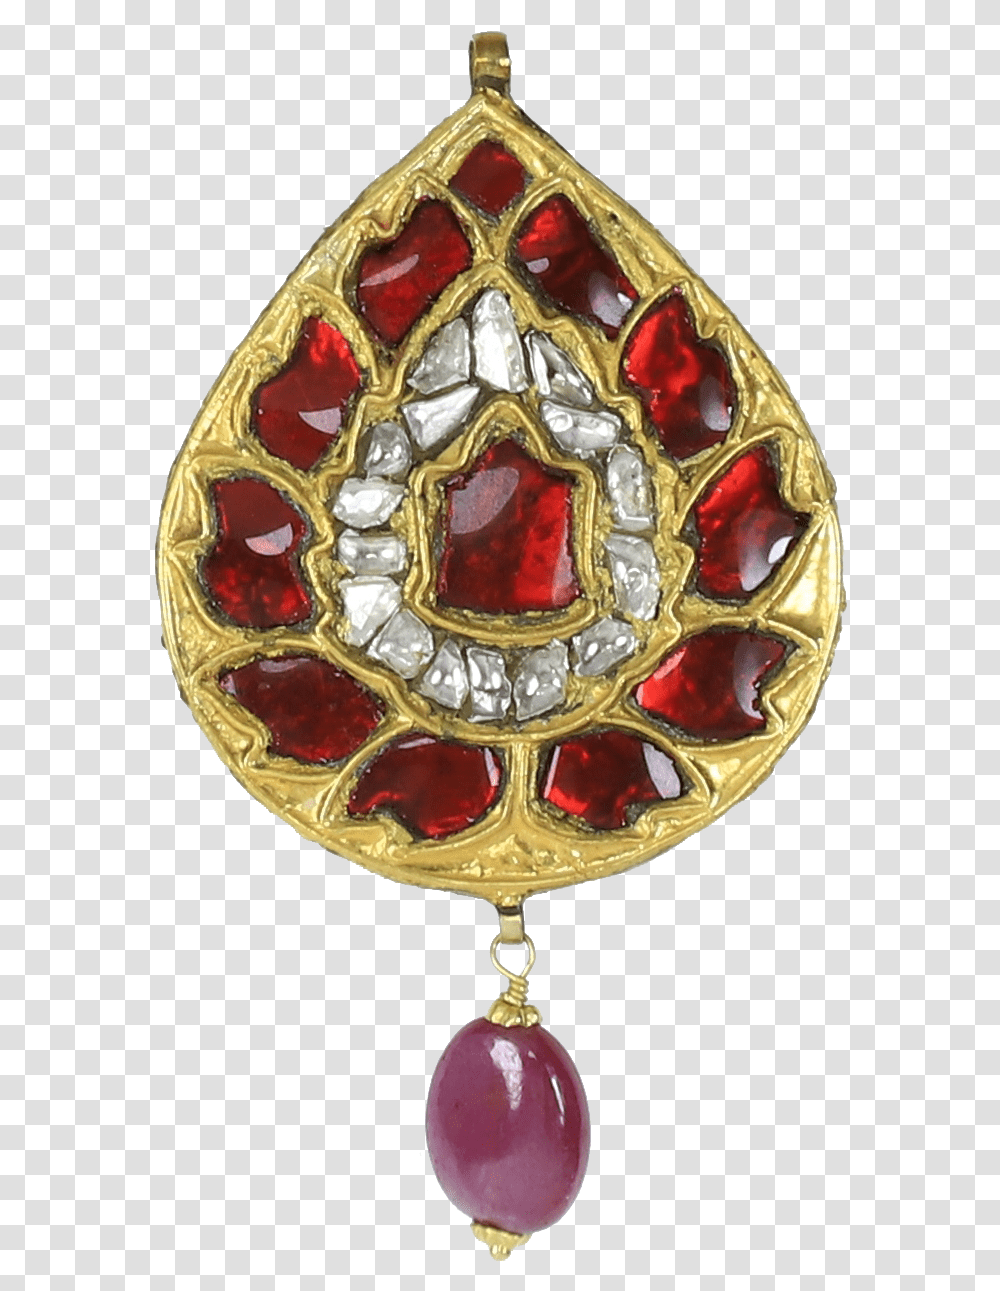 Locket, Jewelry, Accessories, Accessory, Brooch Transparent Png